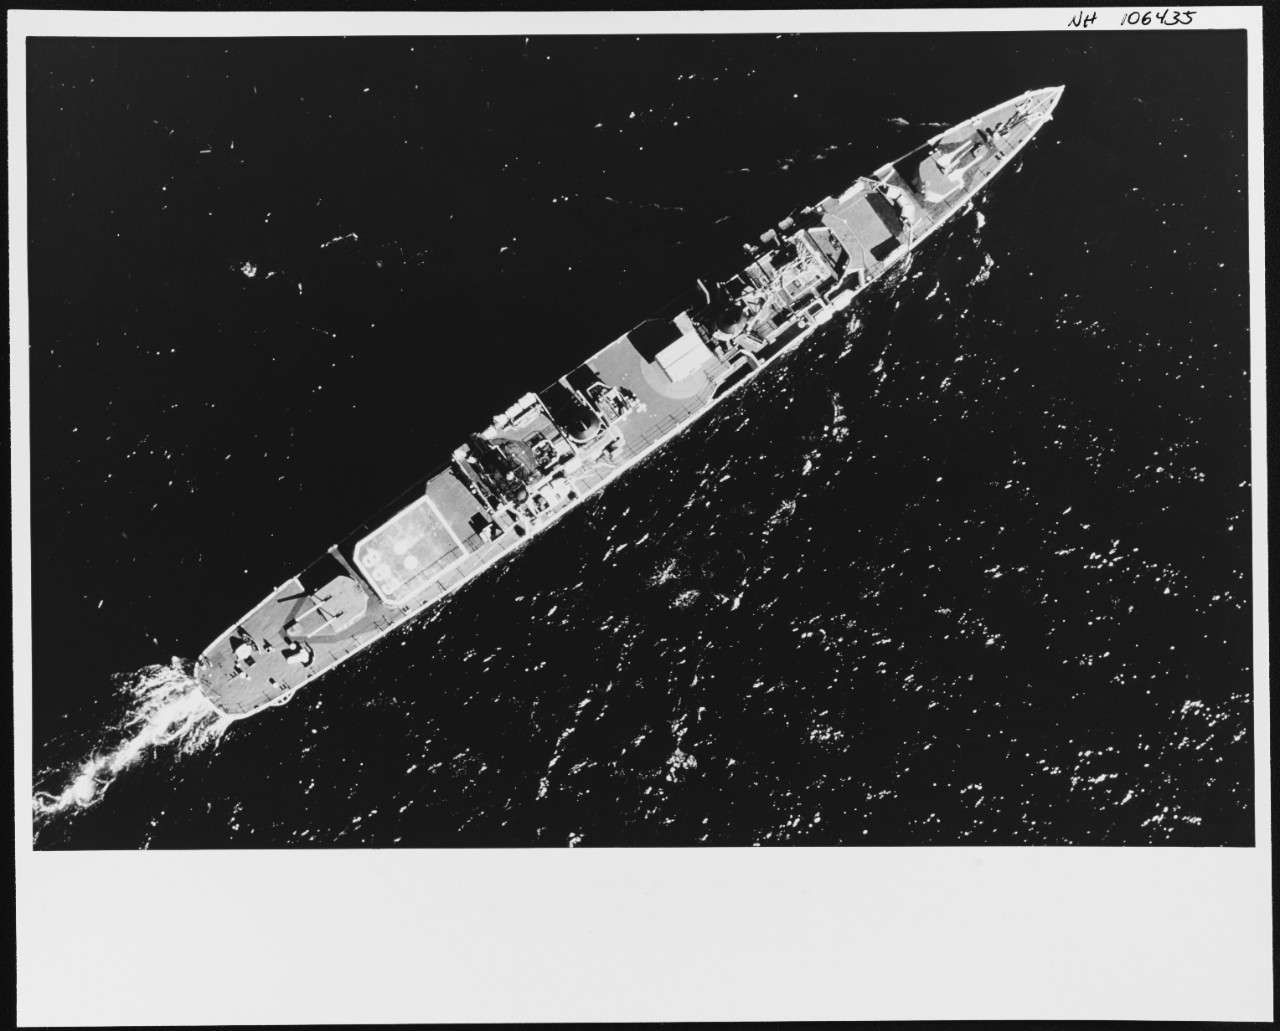 Photo #: NH 106435  USS Newman K. Perry